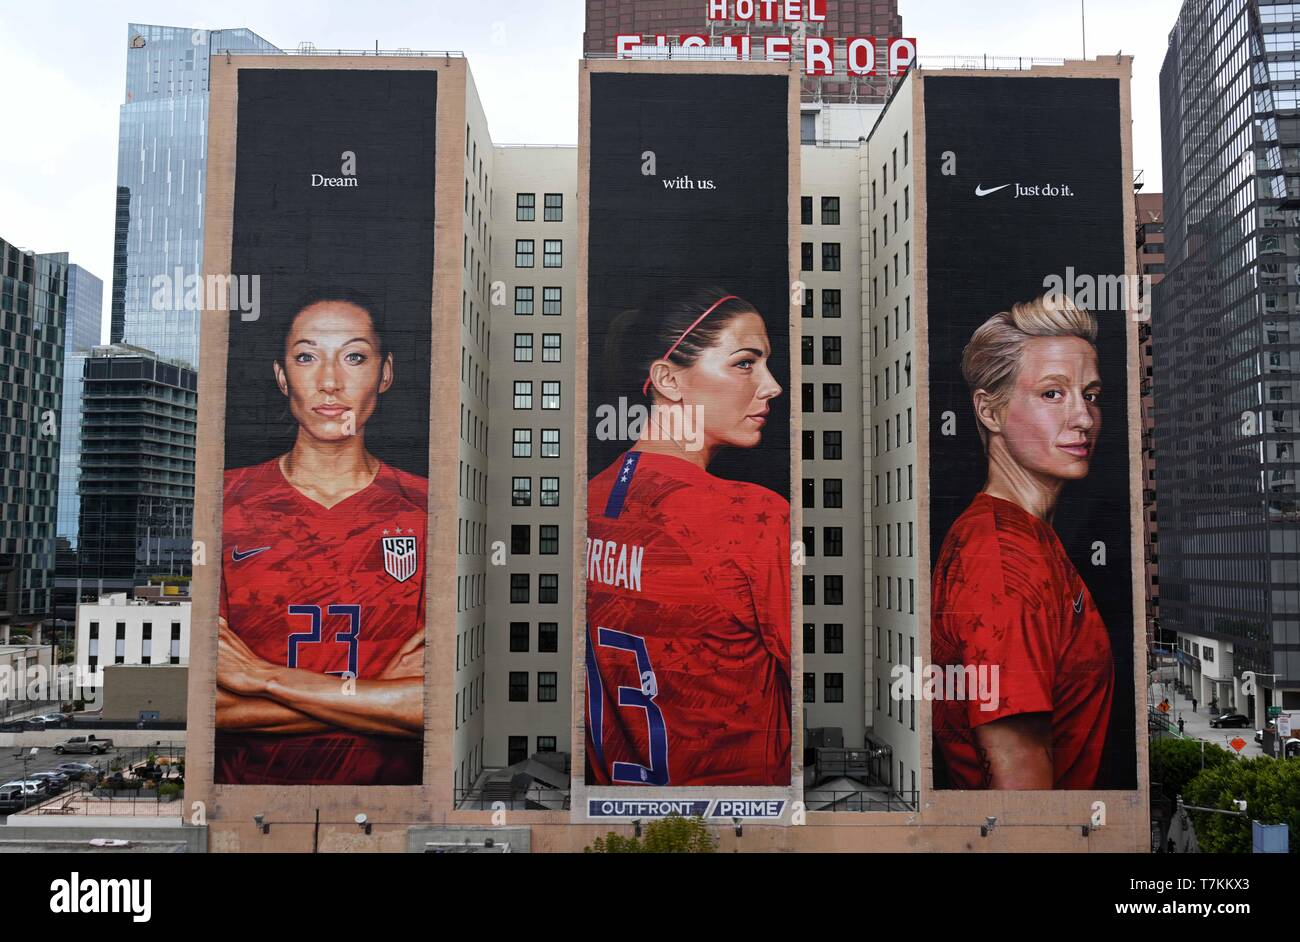 Los Angeles, United States. 07th May, 2019. General overall view of Nike  advertisement billboard featuring United States women's national team  soccer forwards Christen Press (left), Alex Morgan (center) and Morgan  Rapinoe with